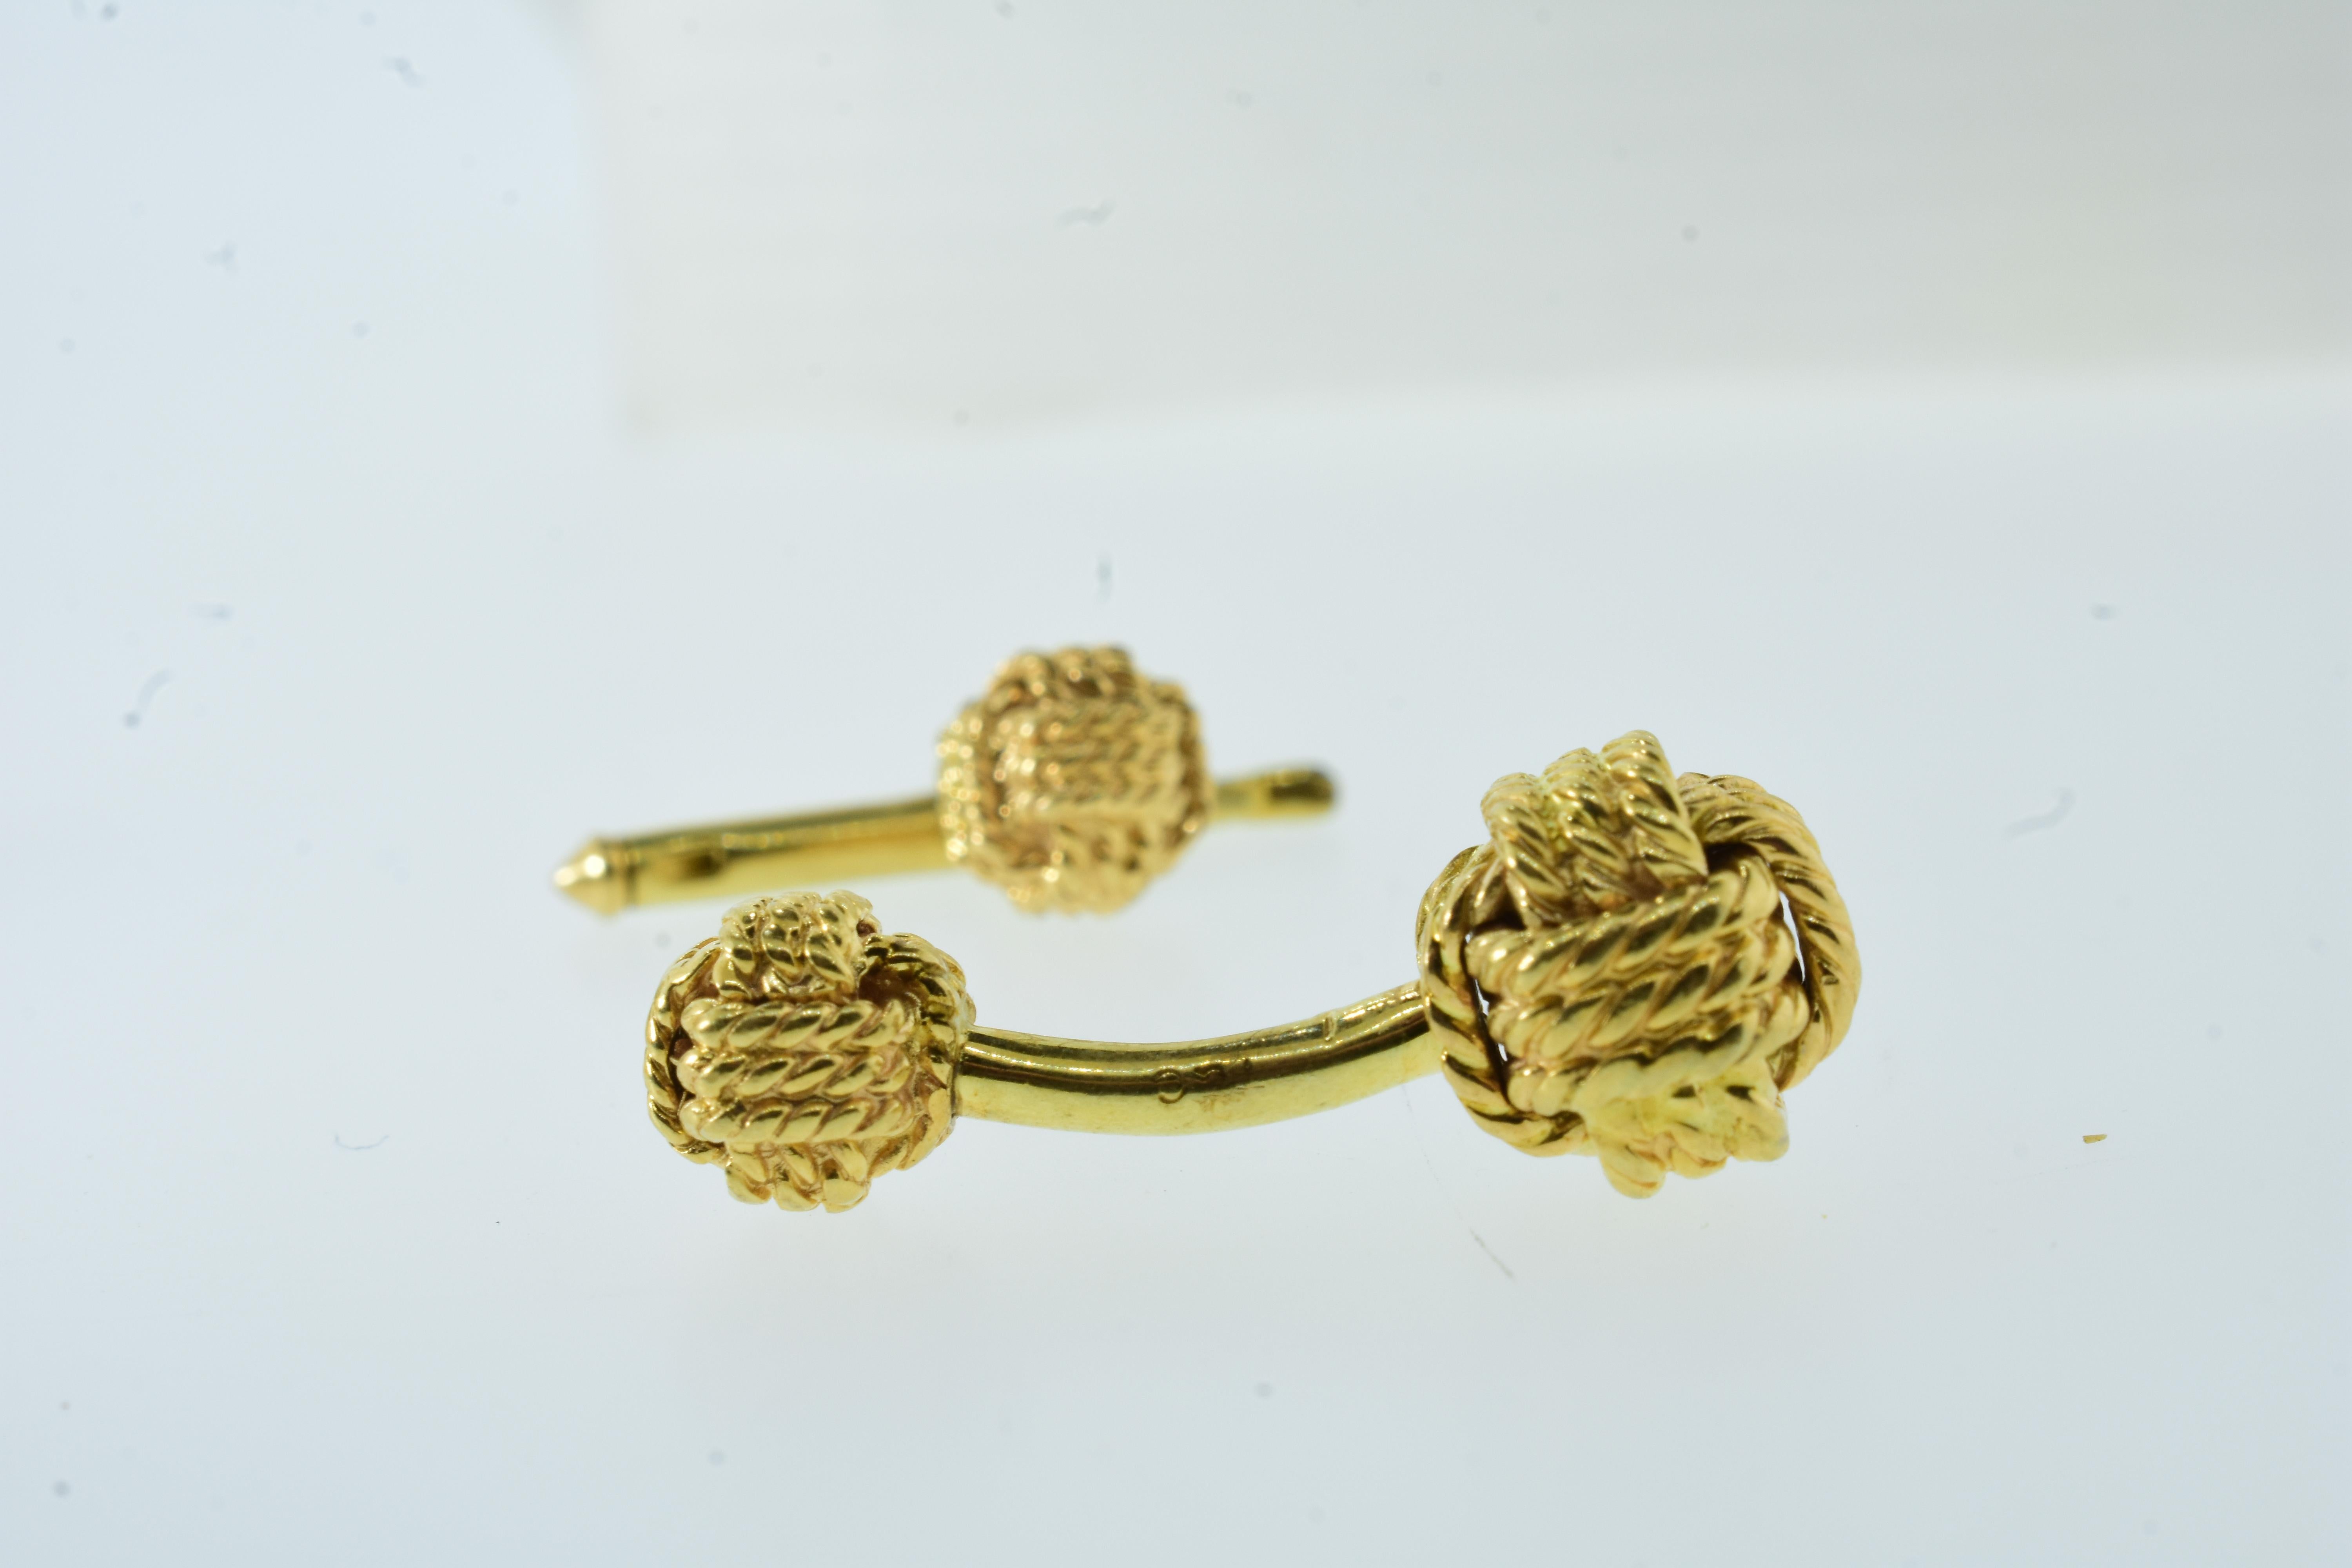 Tiffany & Co. Yellow Gold Cuff & Stud Set in a Love Knot Motif, Vintage, c. 1970 In Excellent Condition For Sale In Aspen, CO